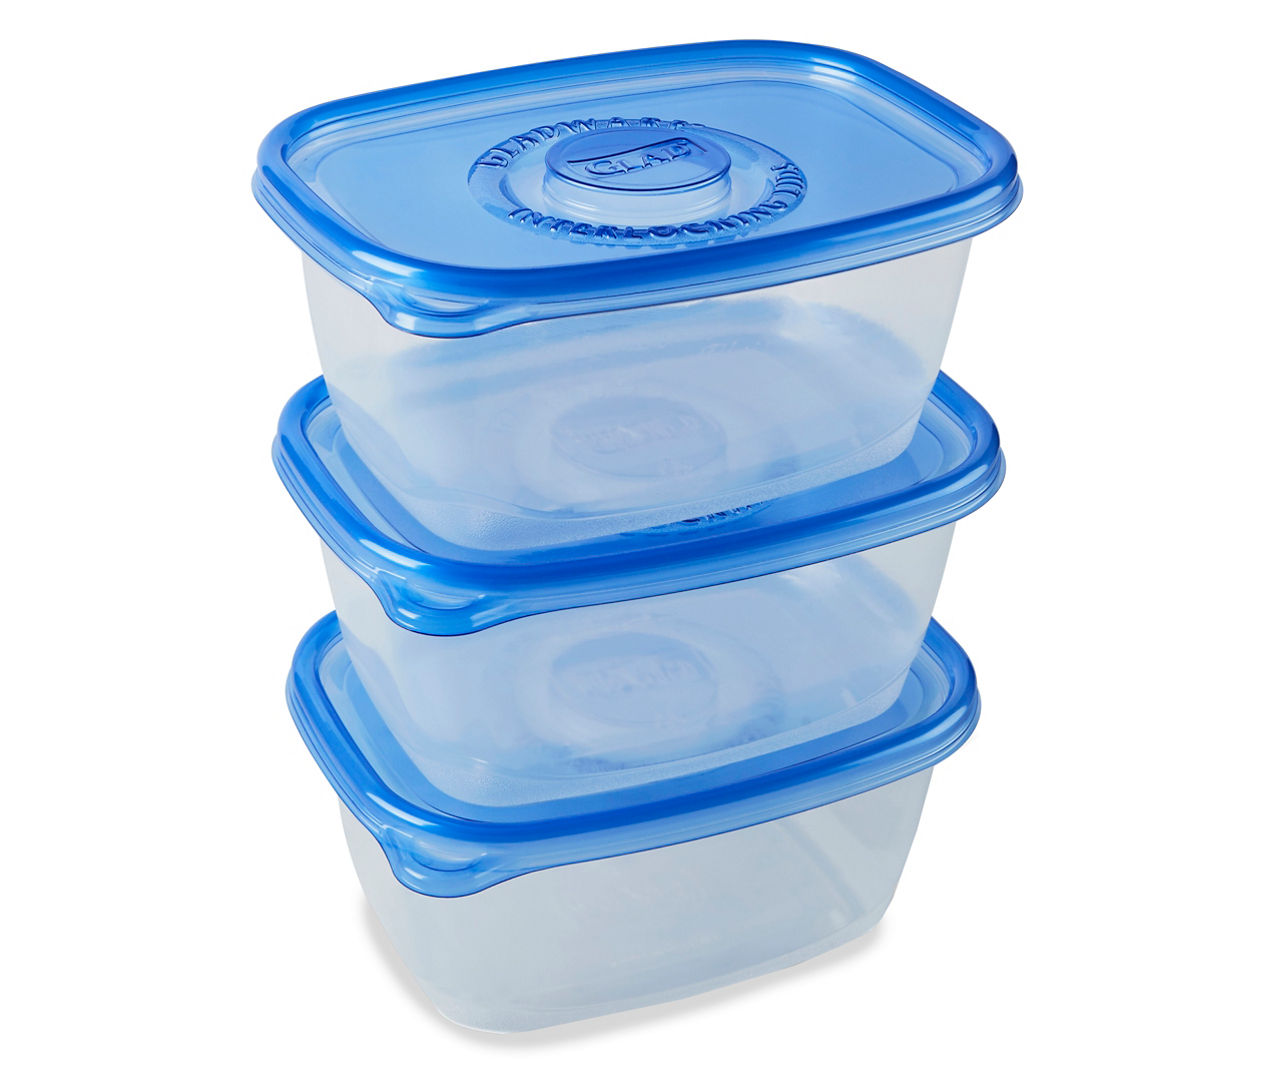 Glad Containers & Lids, Deep Dish, Large Rectangle, 8 Cups, Plastic  Containers